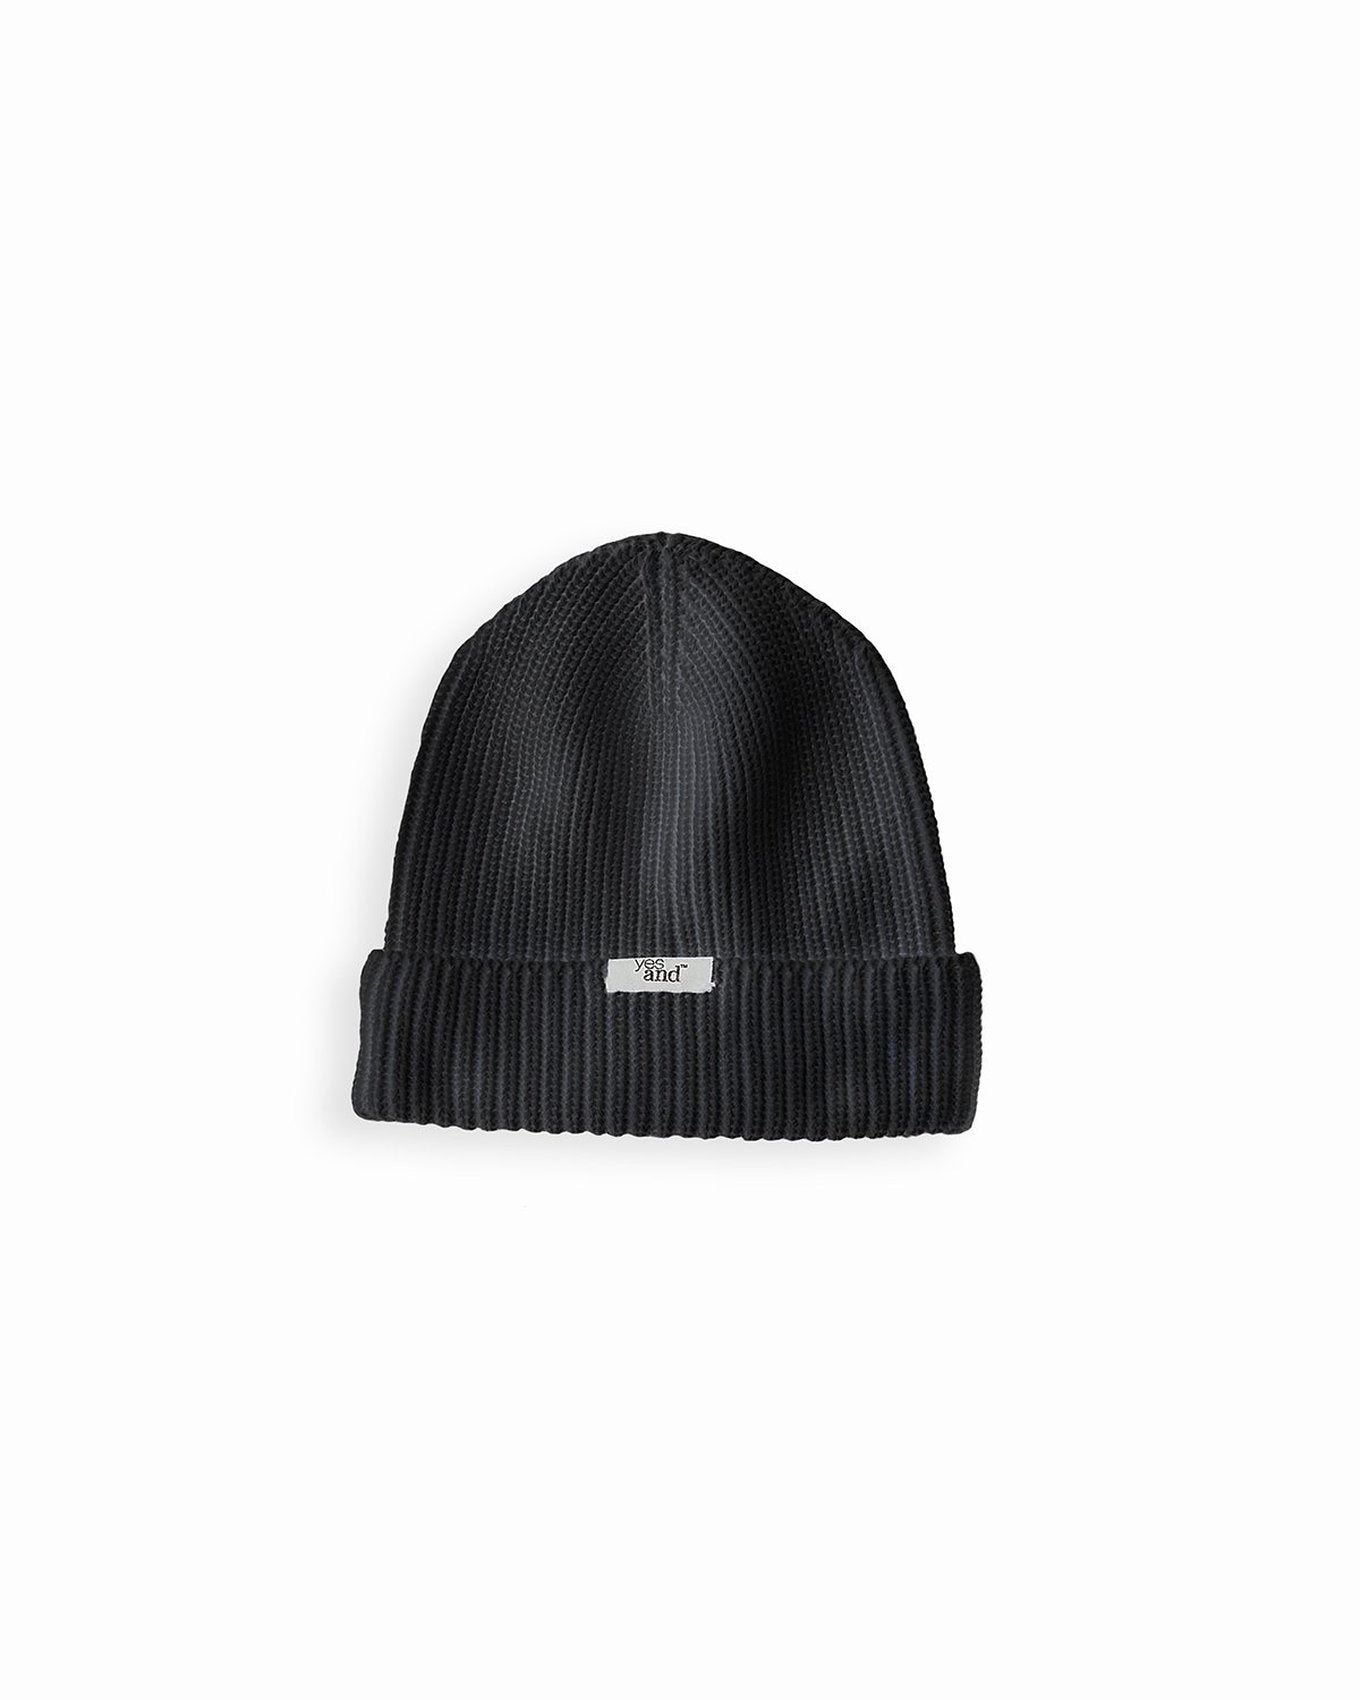 YesAnd Organic Knit Beanie Knit Beanie in color Jet Black and shape beanie